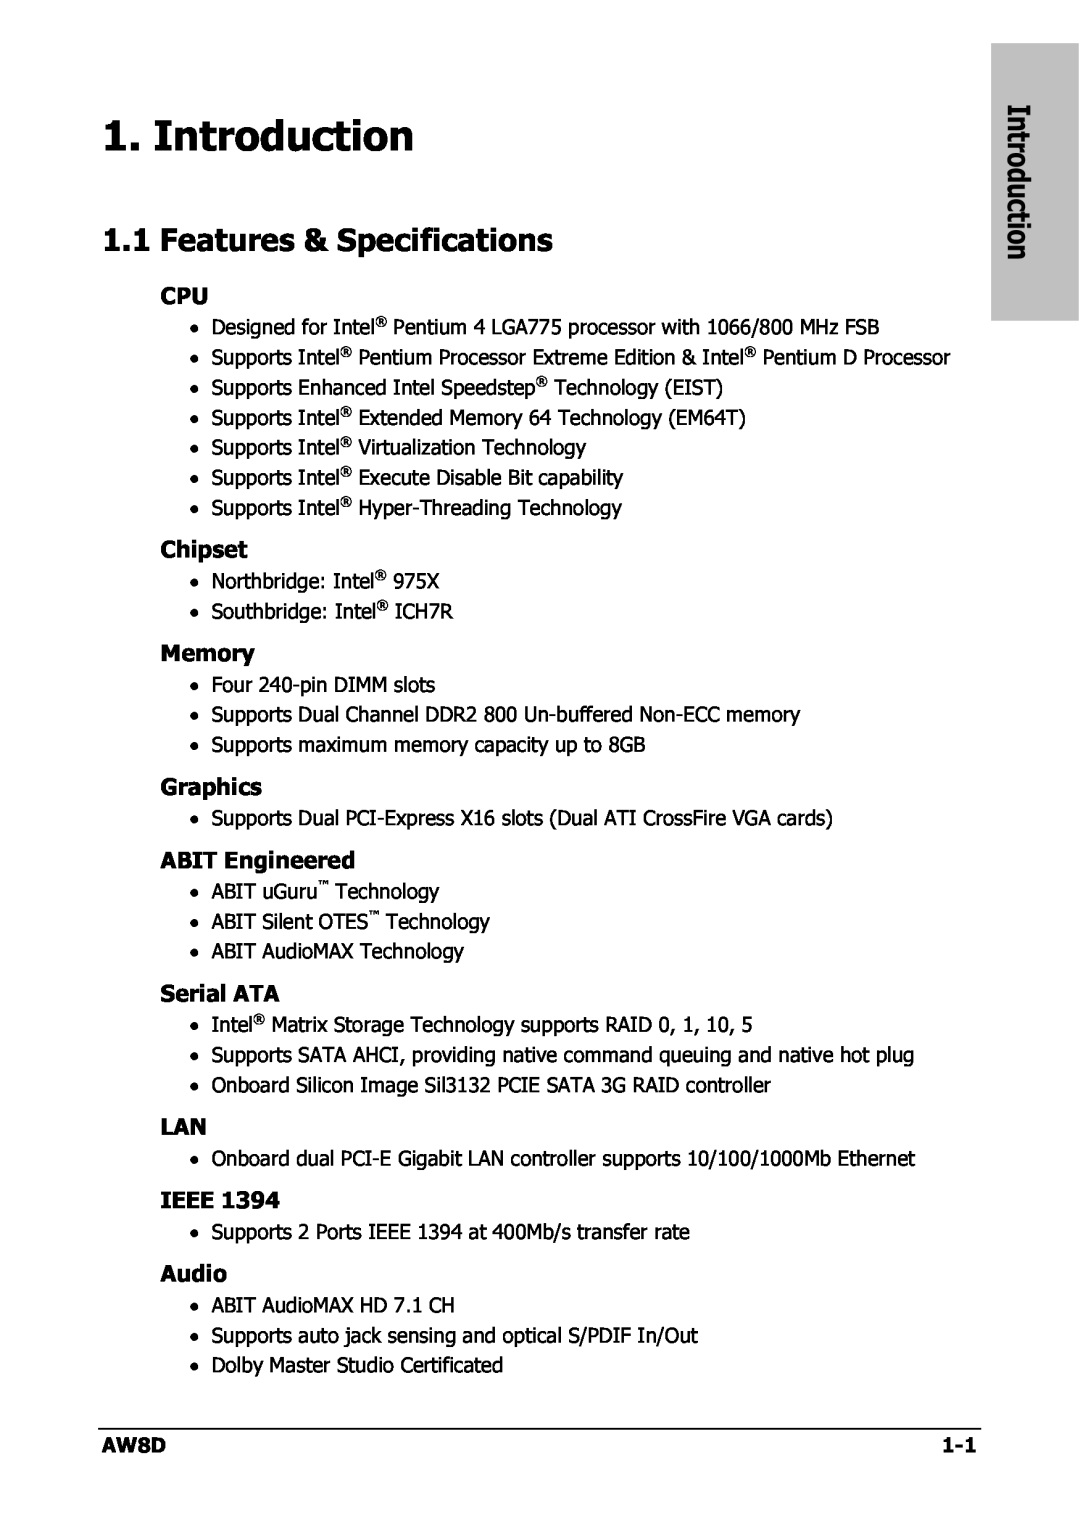 Intel AW8D user manual Introduction, Features & Specifications 